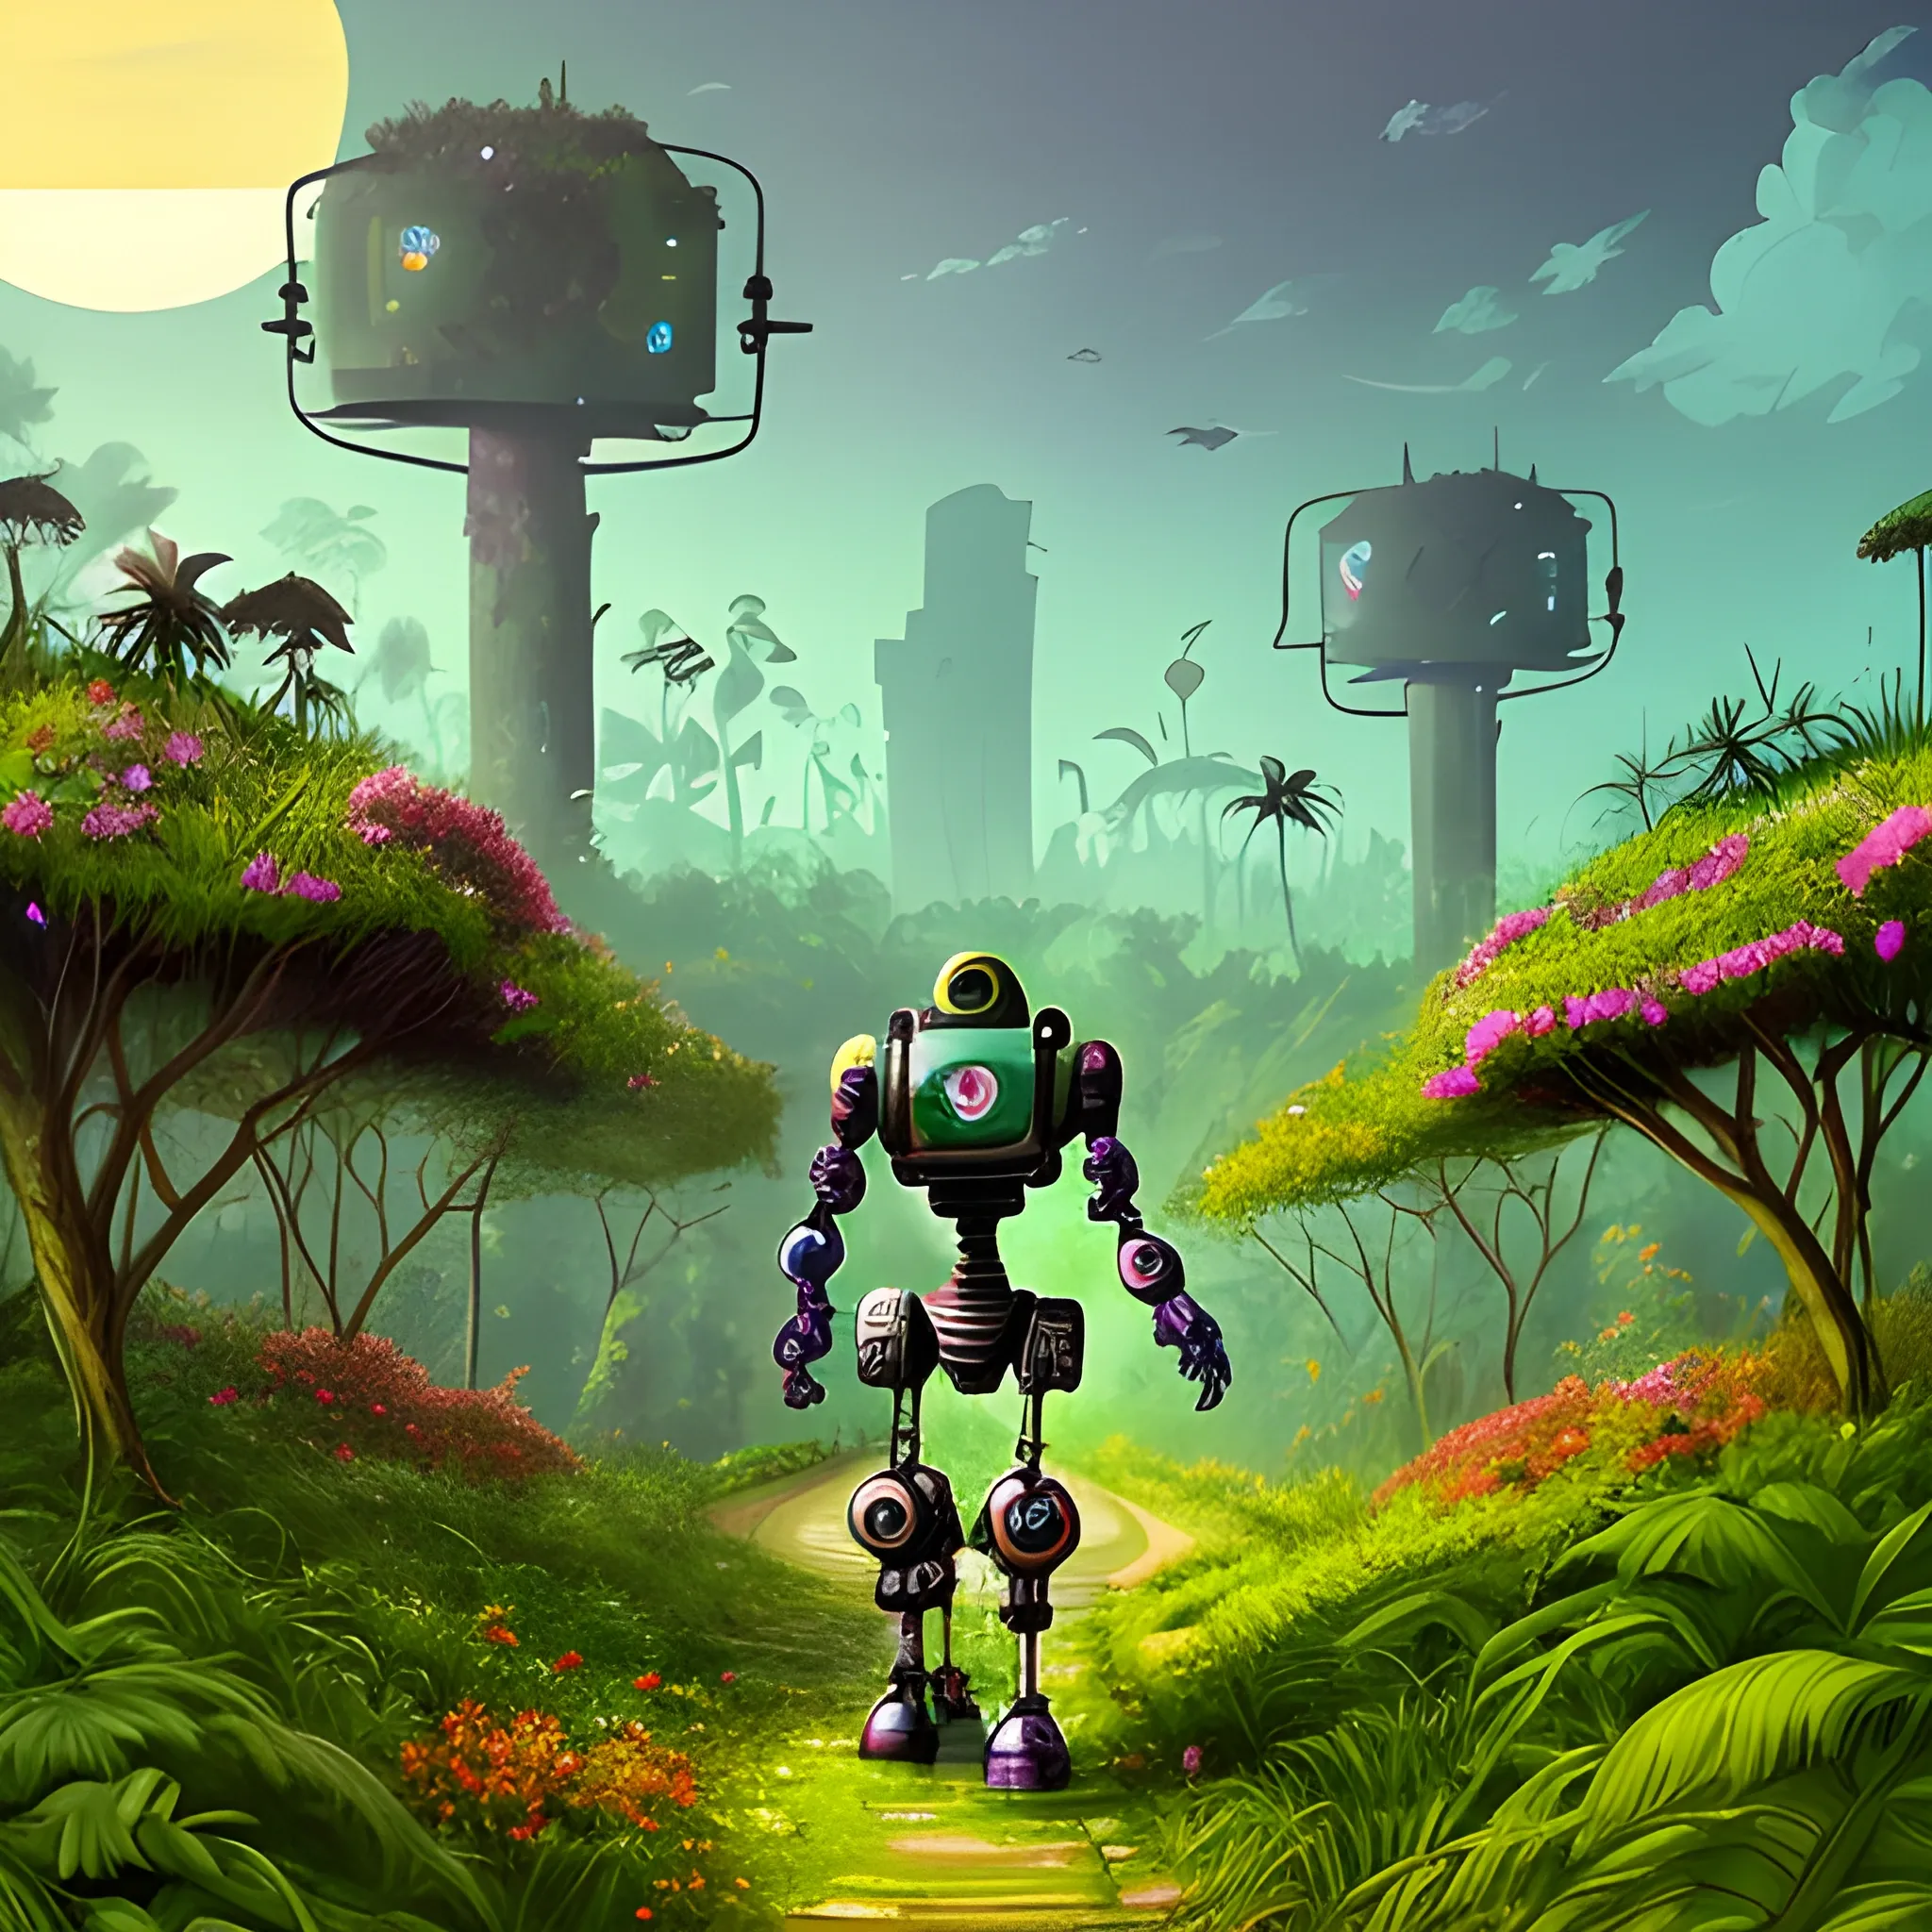 abandoned ruined city overgrown with lush vegetation with very colorful flowers and a very sophisticated robot walking towards the horizon of a setting sun